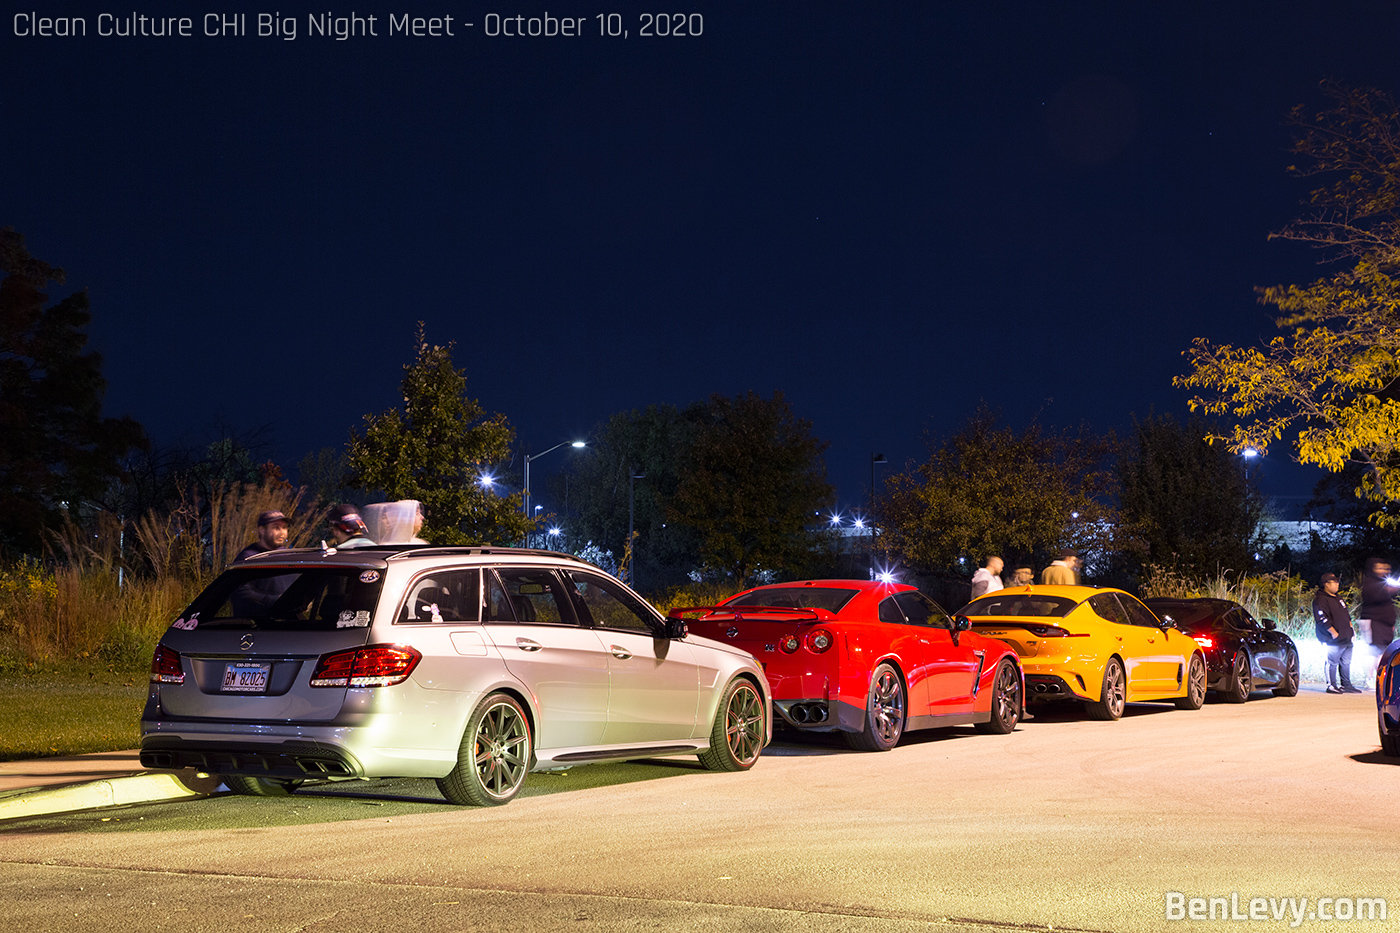 RWD and AWD cars art Clean Culture meet outside of Chicago